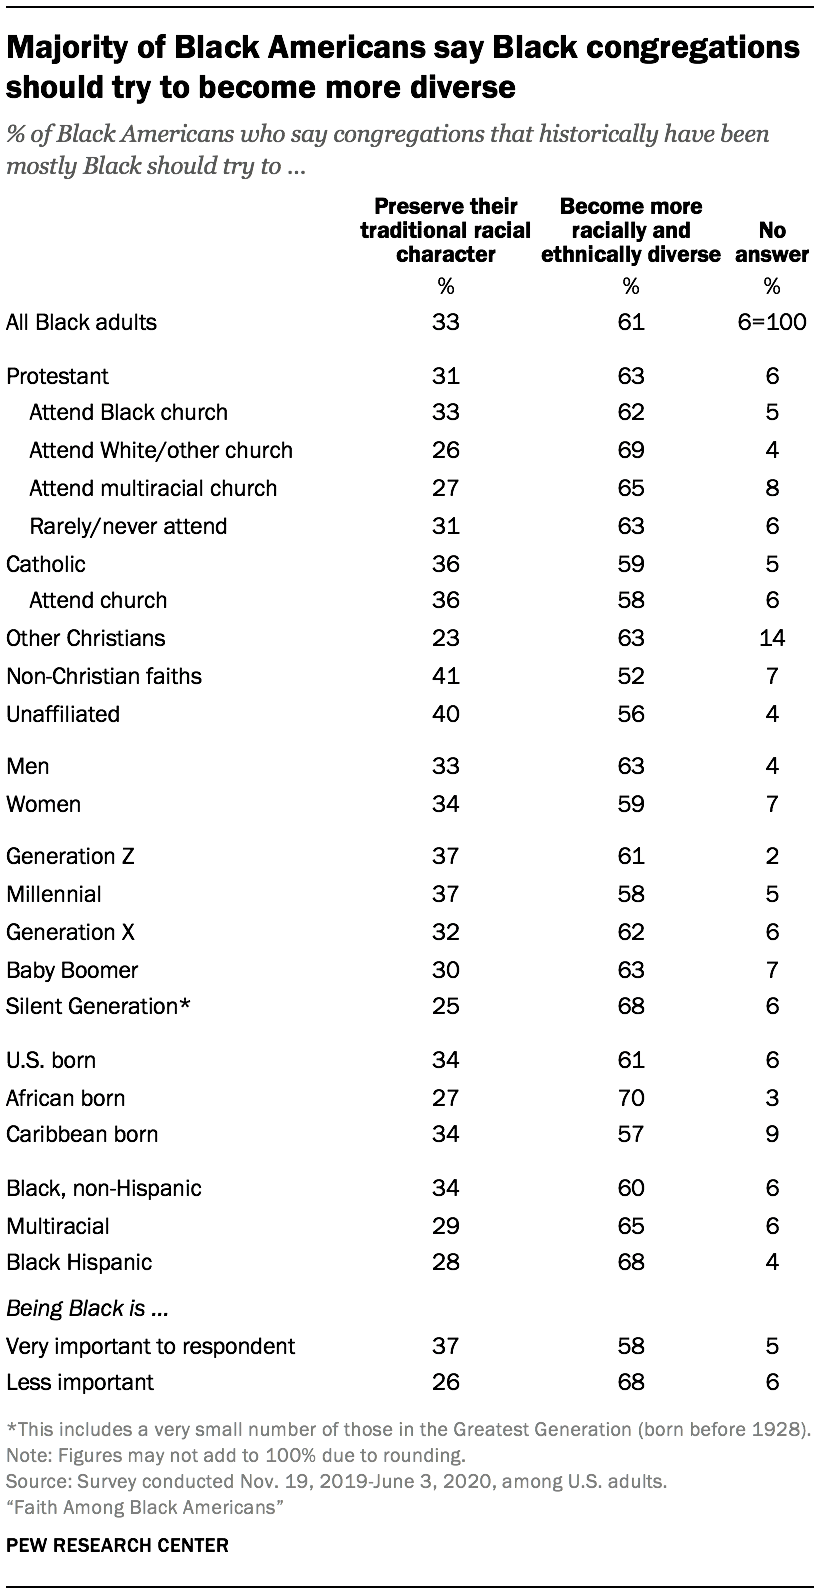 Majority of Black Americans say Black congregations should try to become more diverse